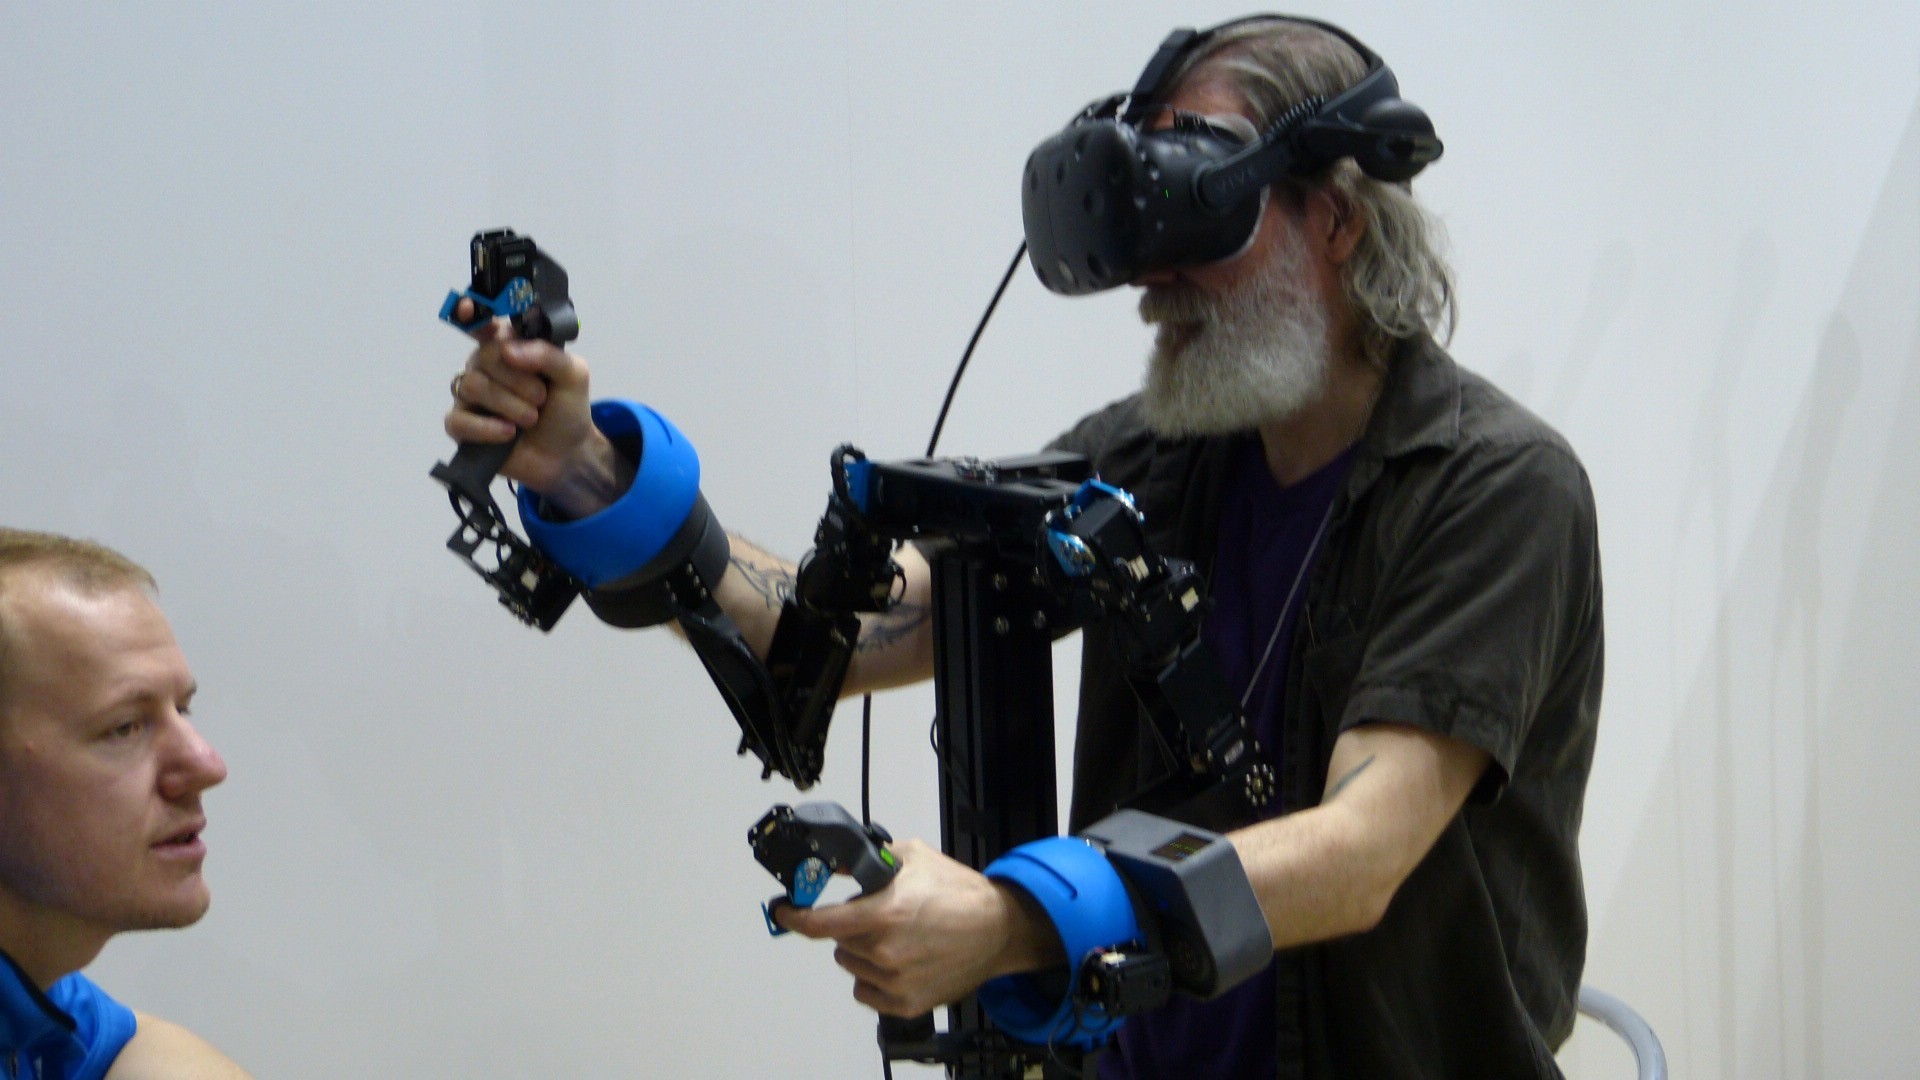 Earl seated with a vr headset on and his hands gripping controllers connected to a frame with arms to limit movement